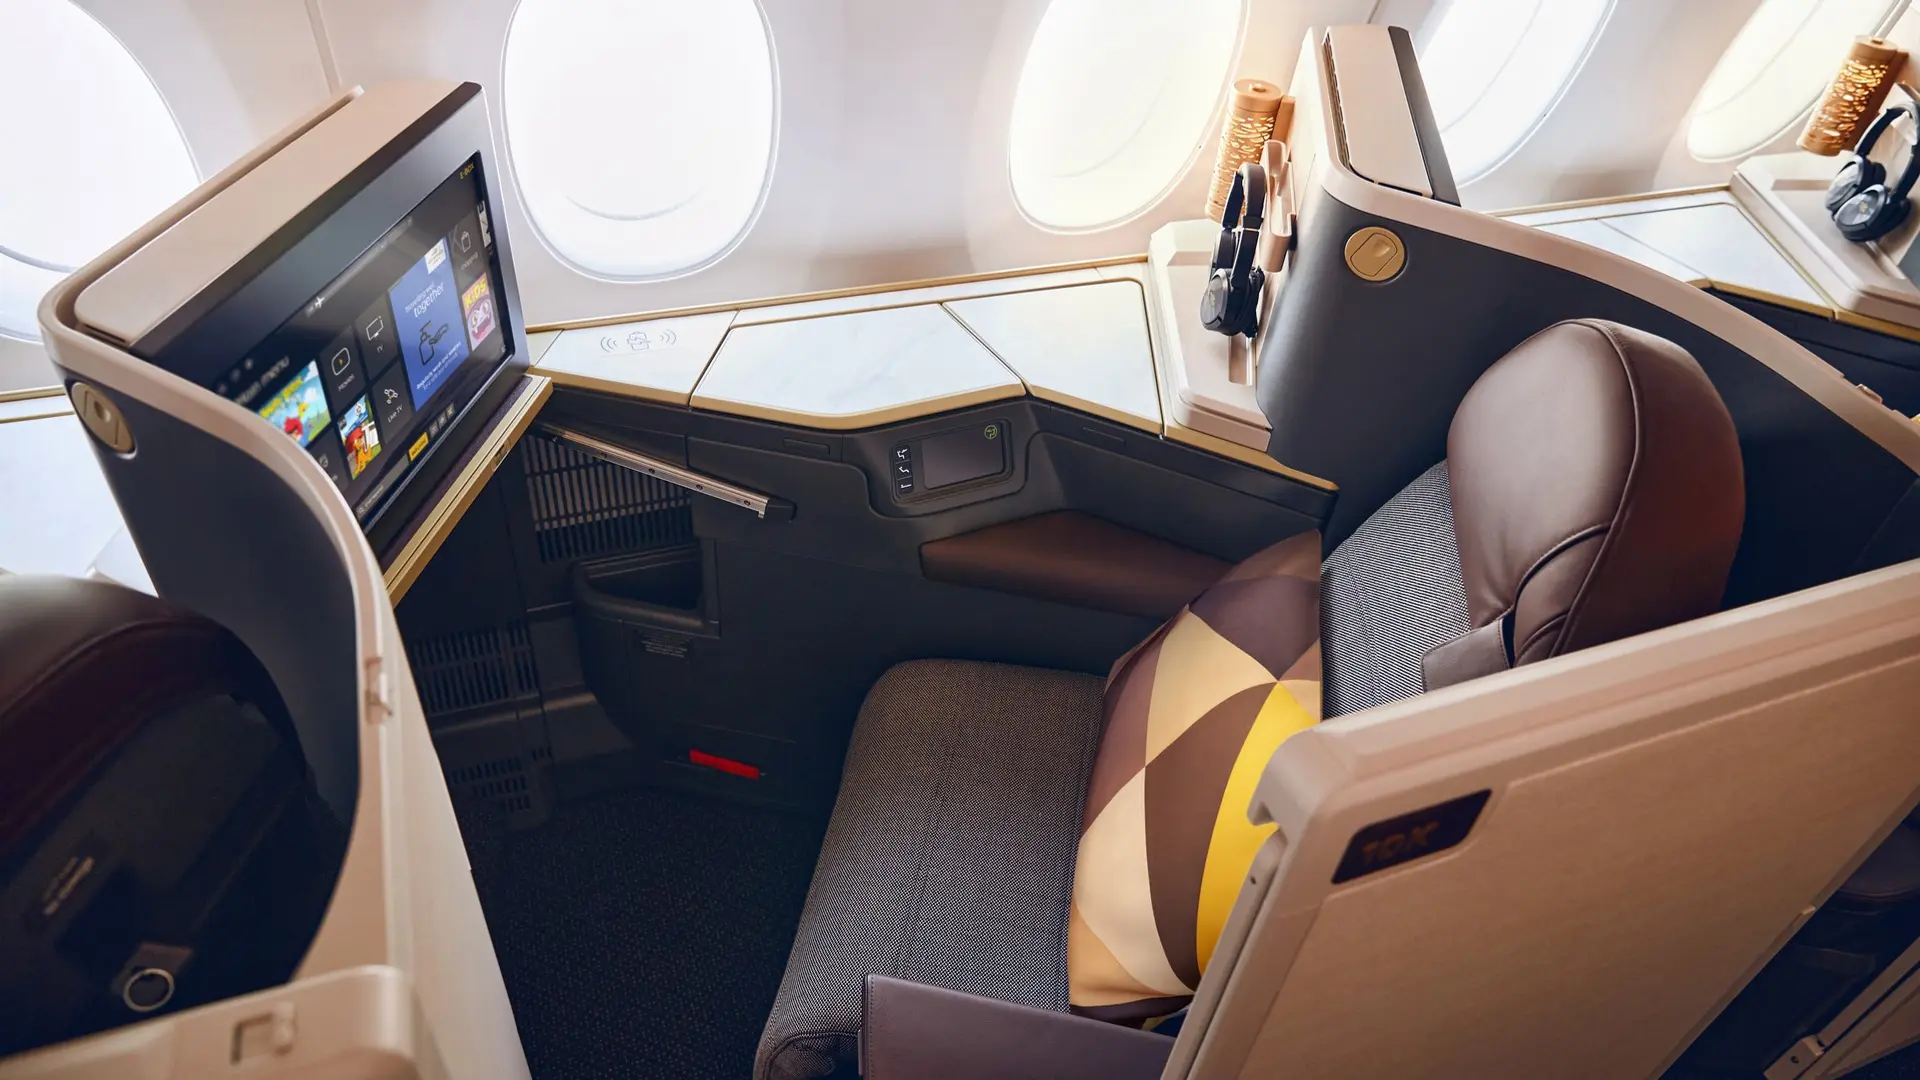 Airlines News - Etihad unveils Suites for its Dreamliners